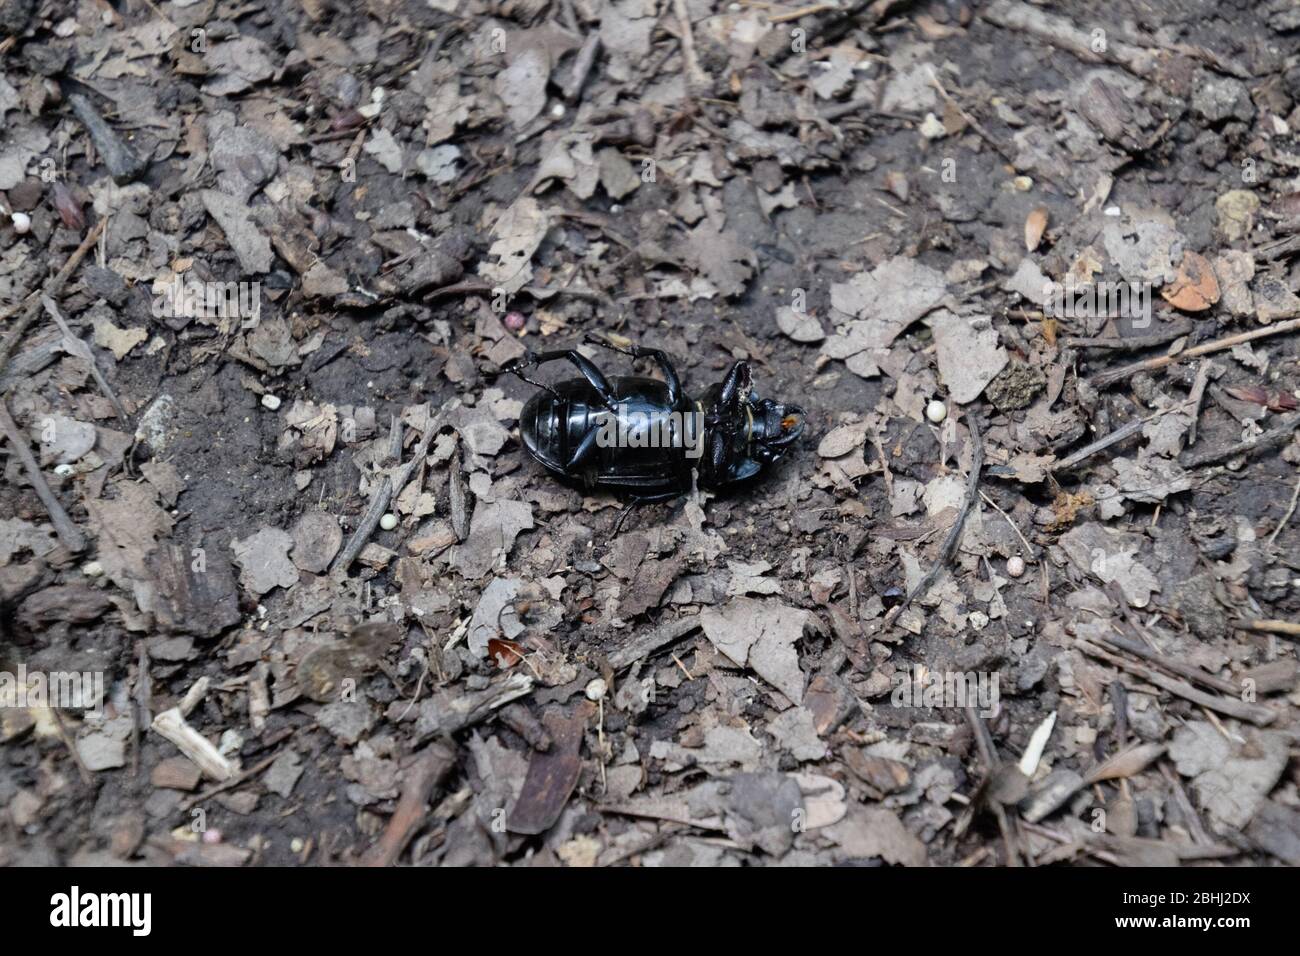 The beetle lies on its back and cannot roll over. Stock Photo